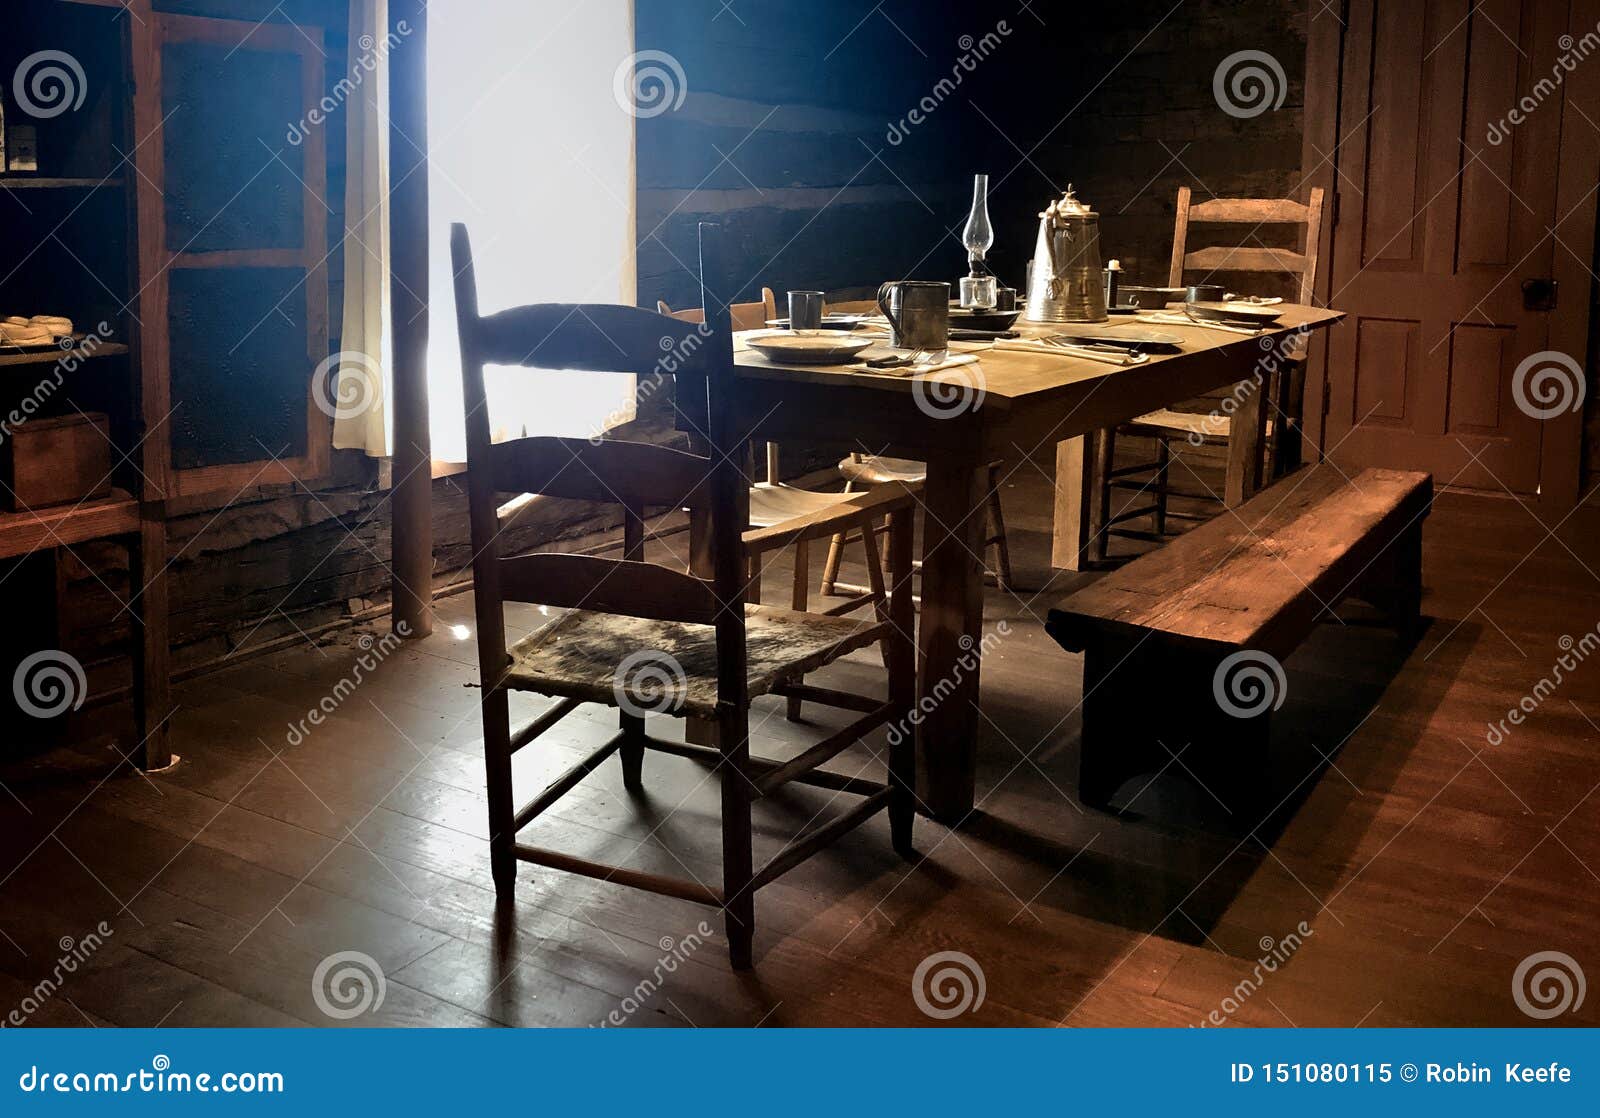 Back Lit Interior Of A Rustic Farmhouse Dining Room Stock Image